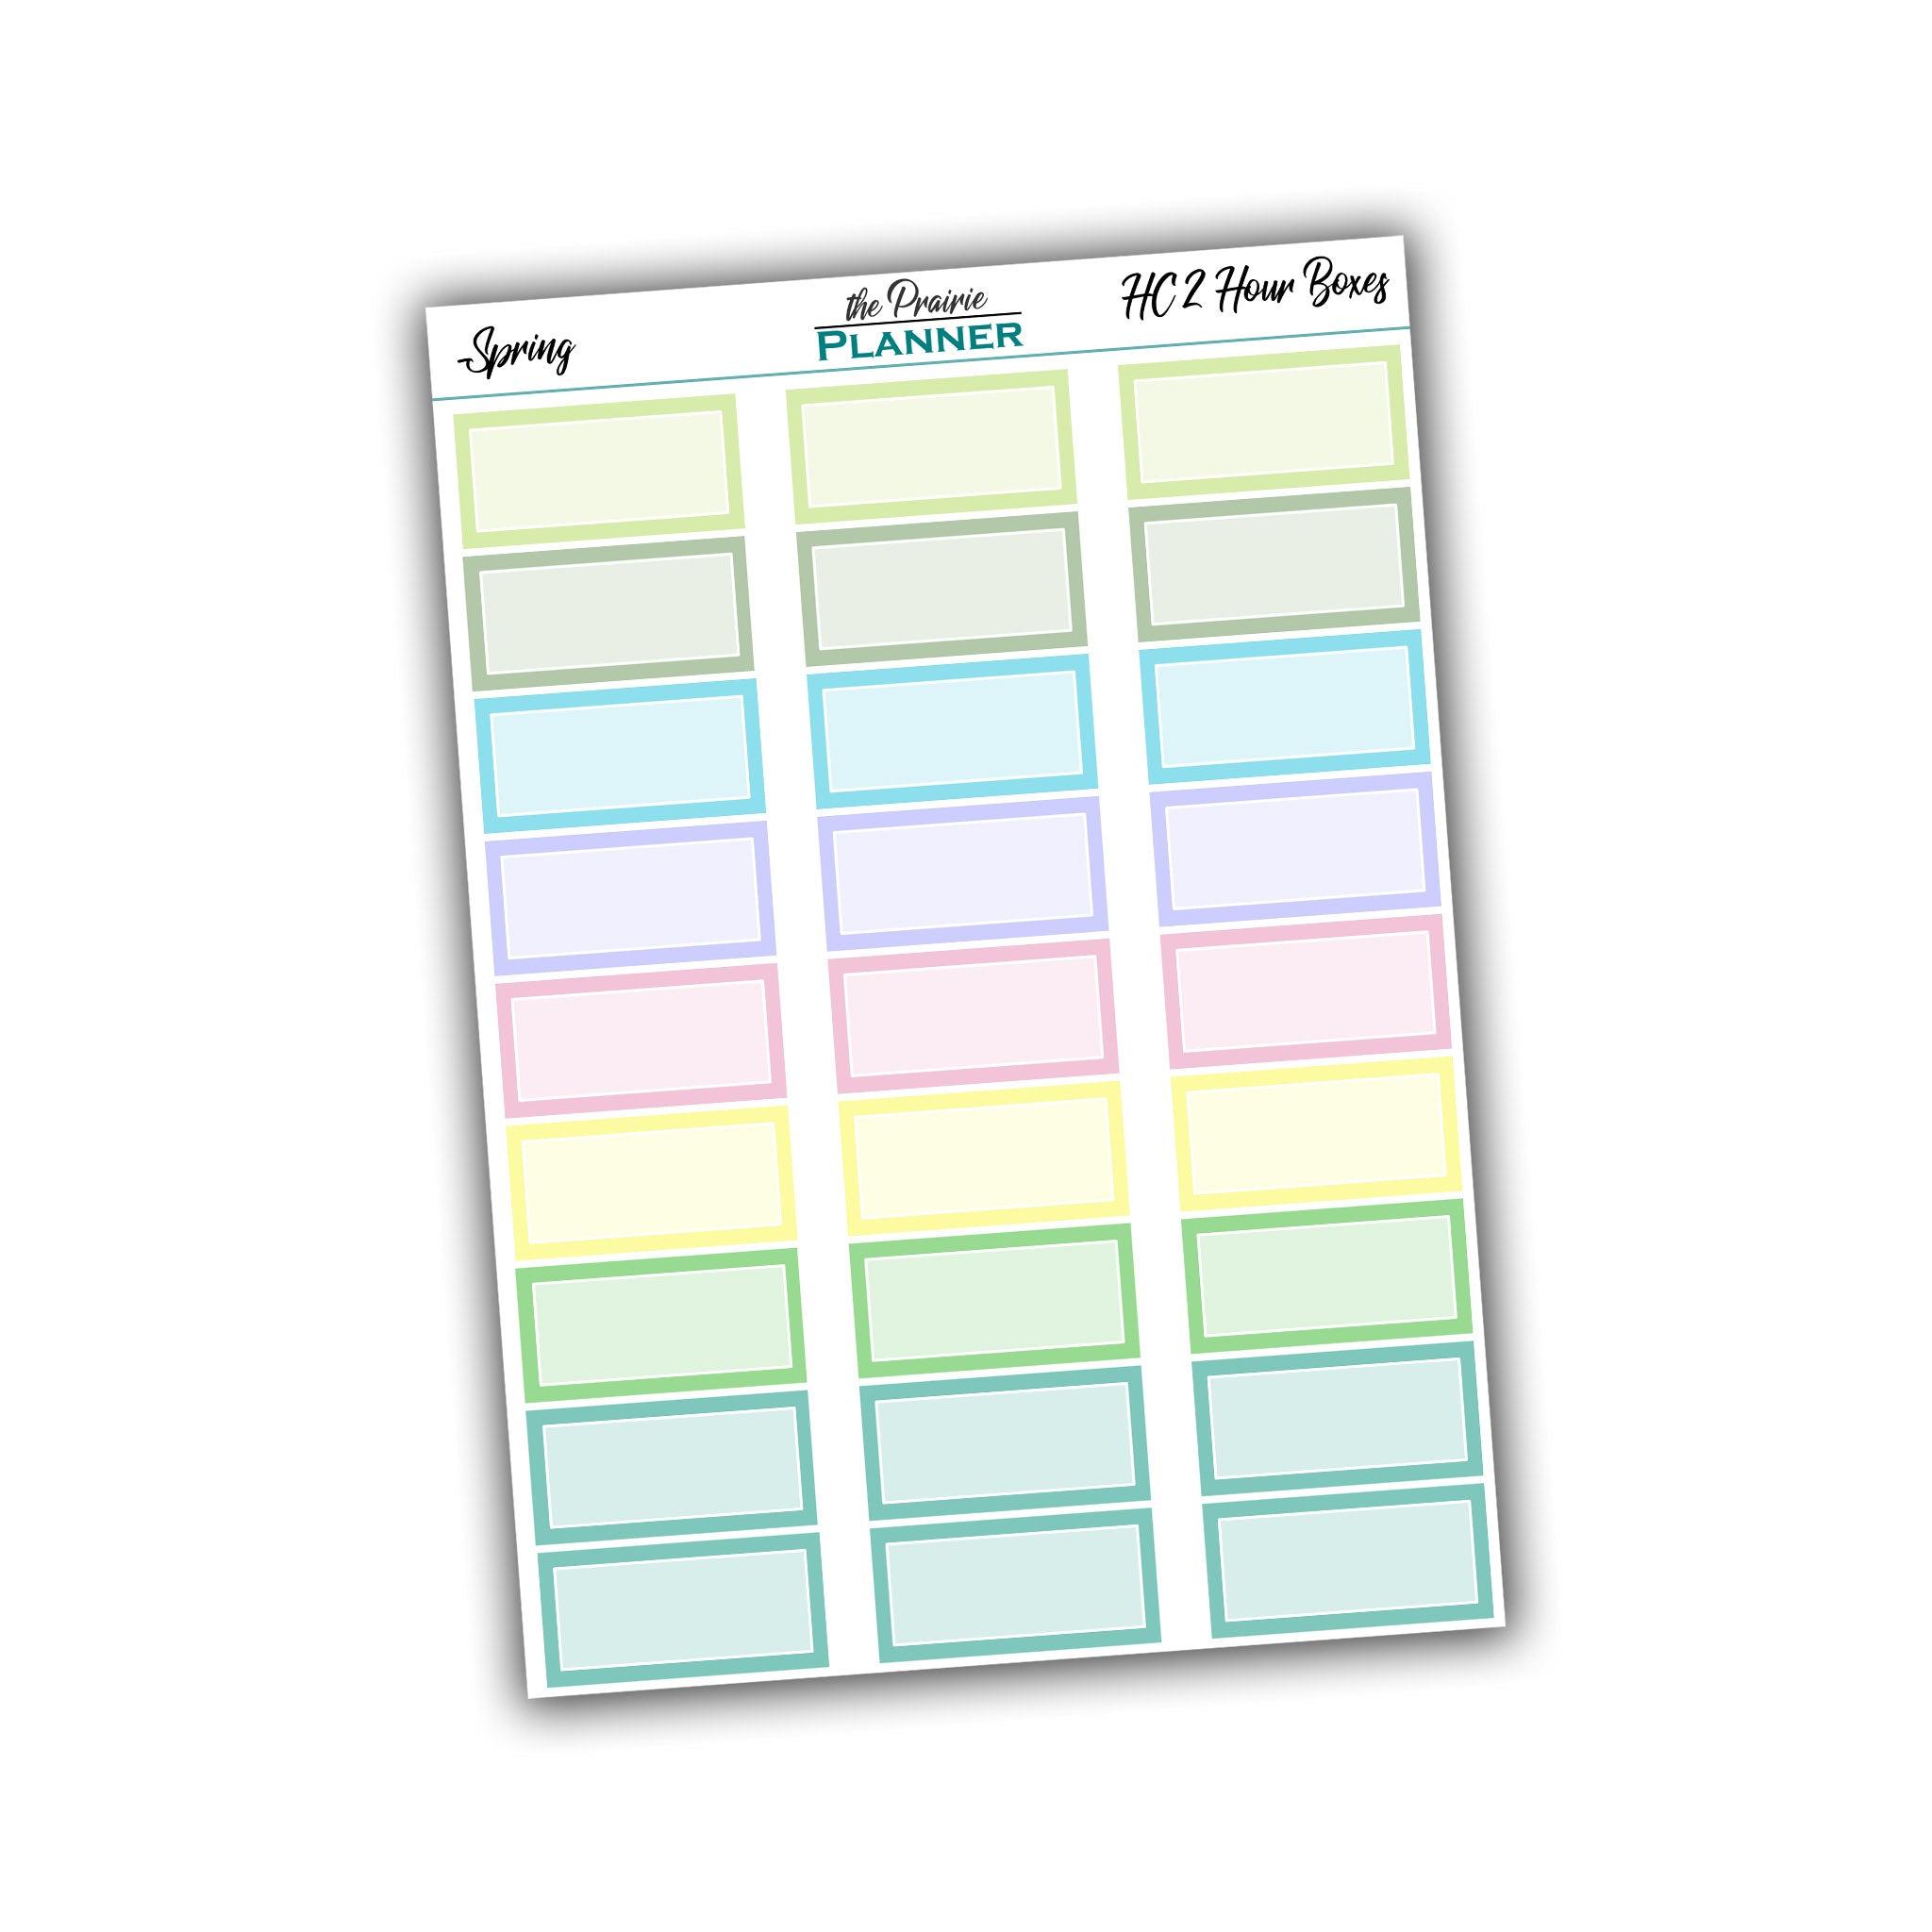 Hobo Cousin 2 Hour Boxes - Fall Multi Colour - Planner Stickers